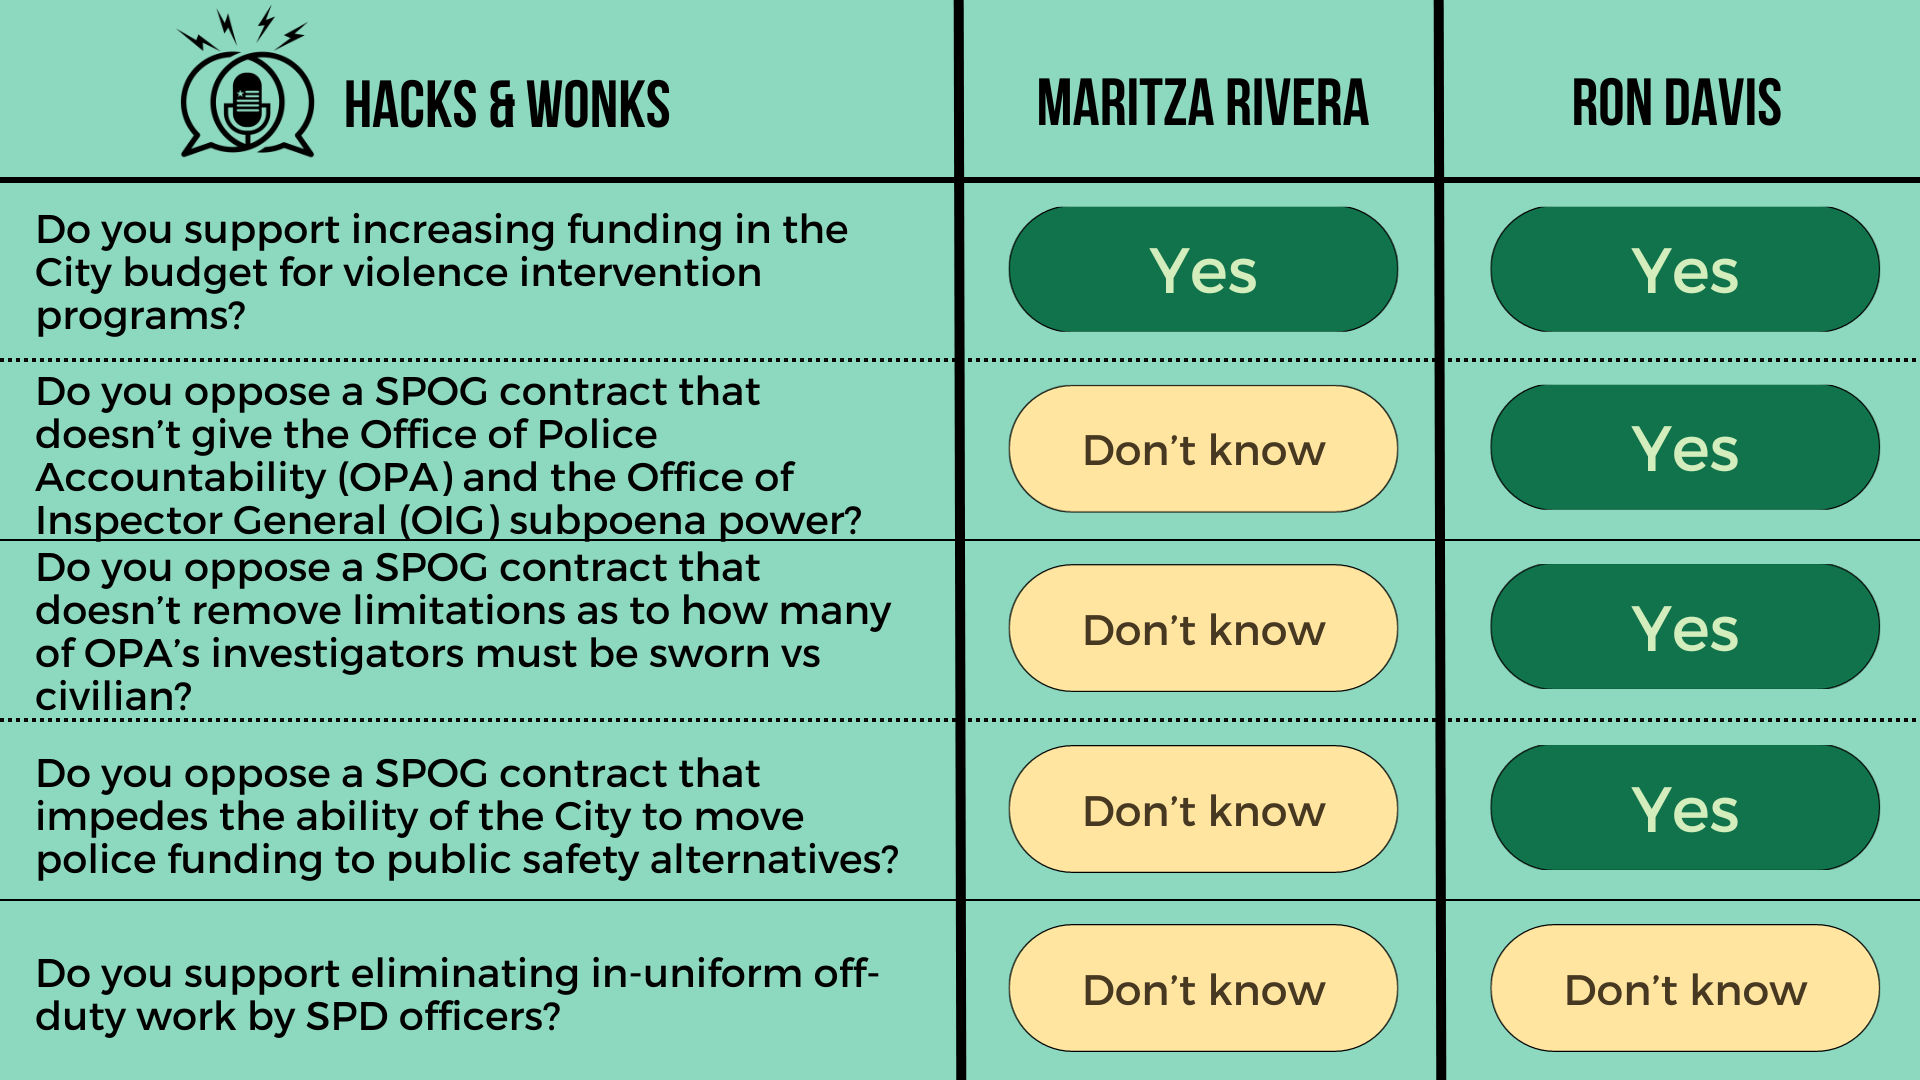 Q: Do you support increasing funding in the City budget for violence intervention programs? Maritza Rivera: Yes, Ron Davis: Yes  Q: Do you oppose a SPOG contract that doesn’t give the Office of Police Accountability (OPA) and the Office of Inspector